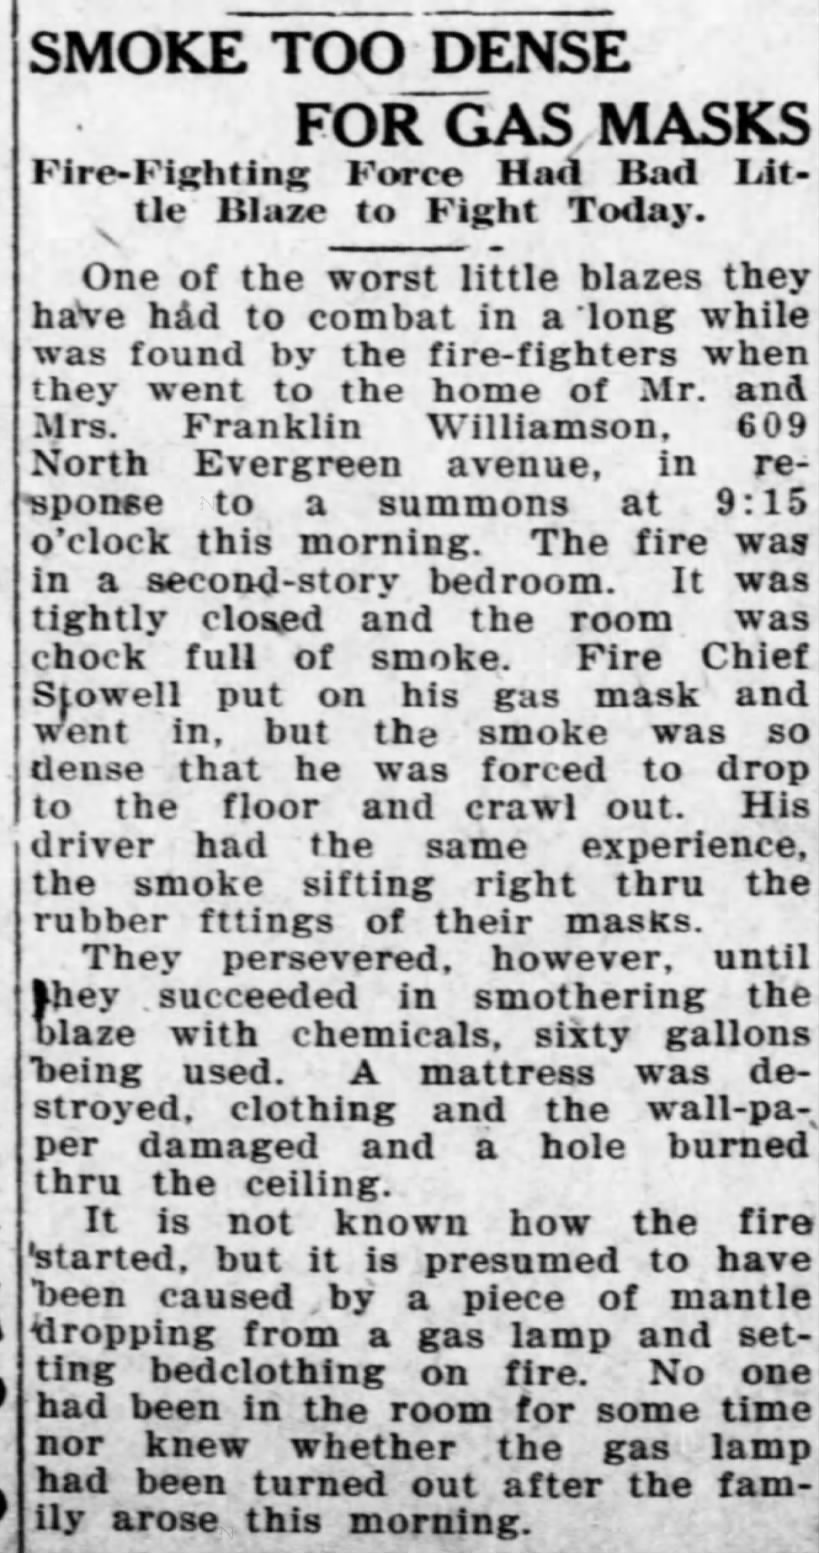 4 May 1920 Williamson House Fire